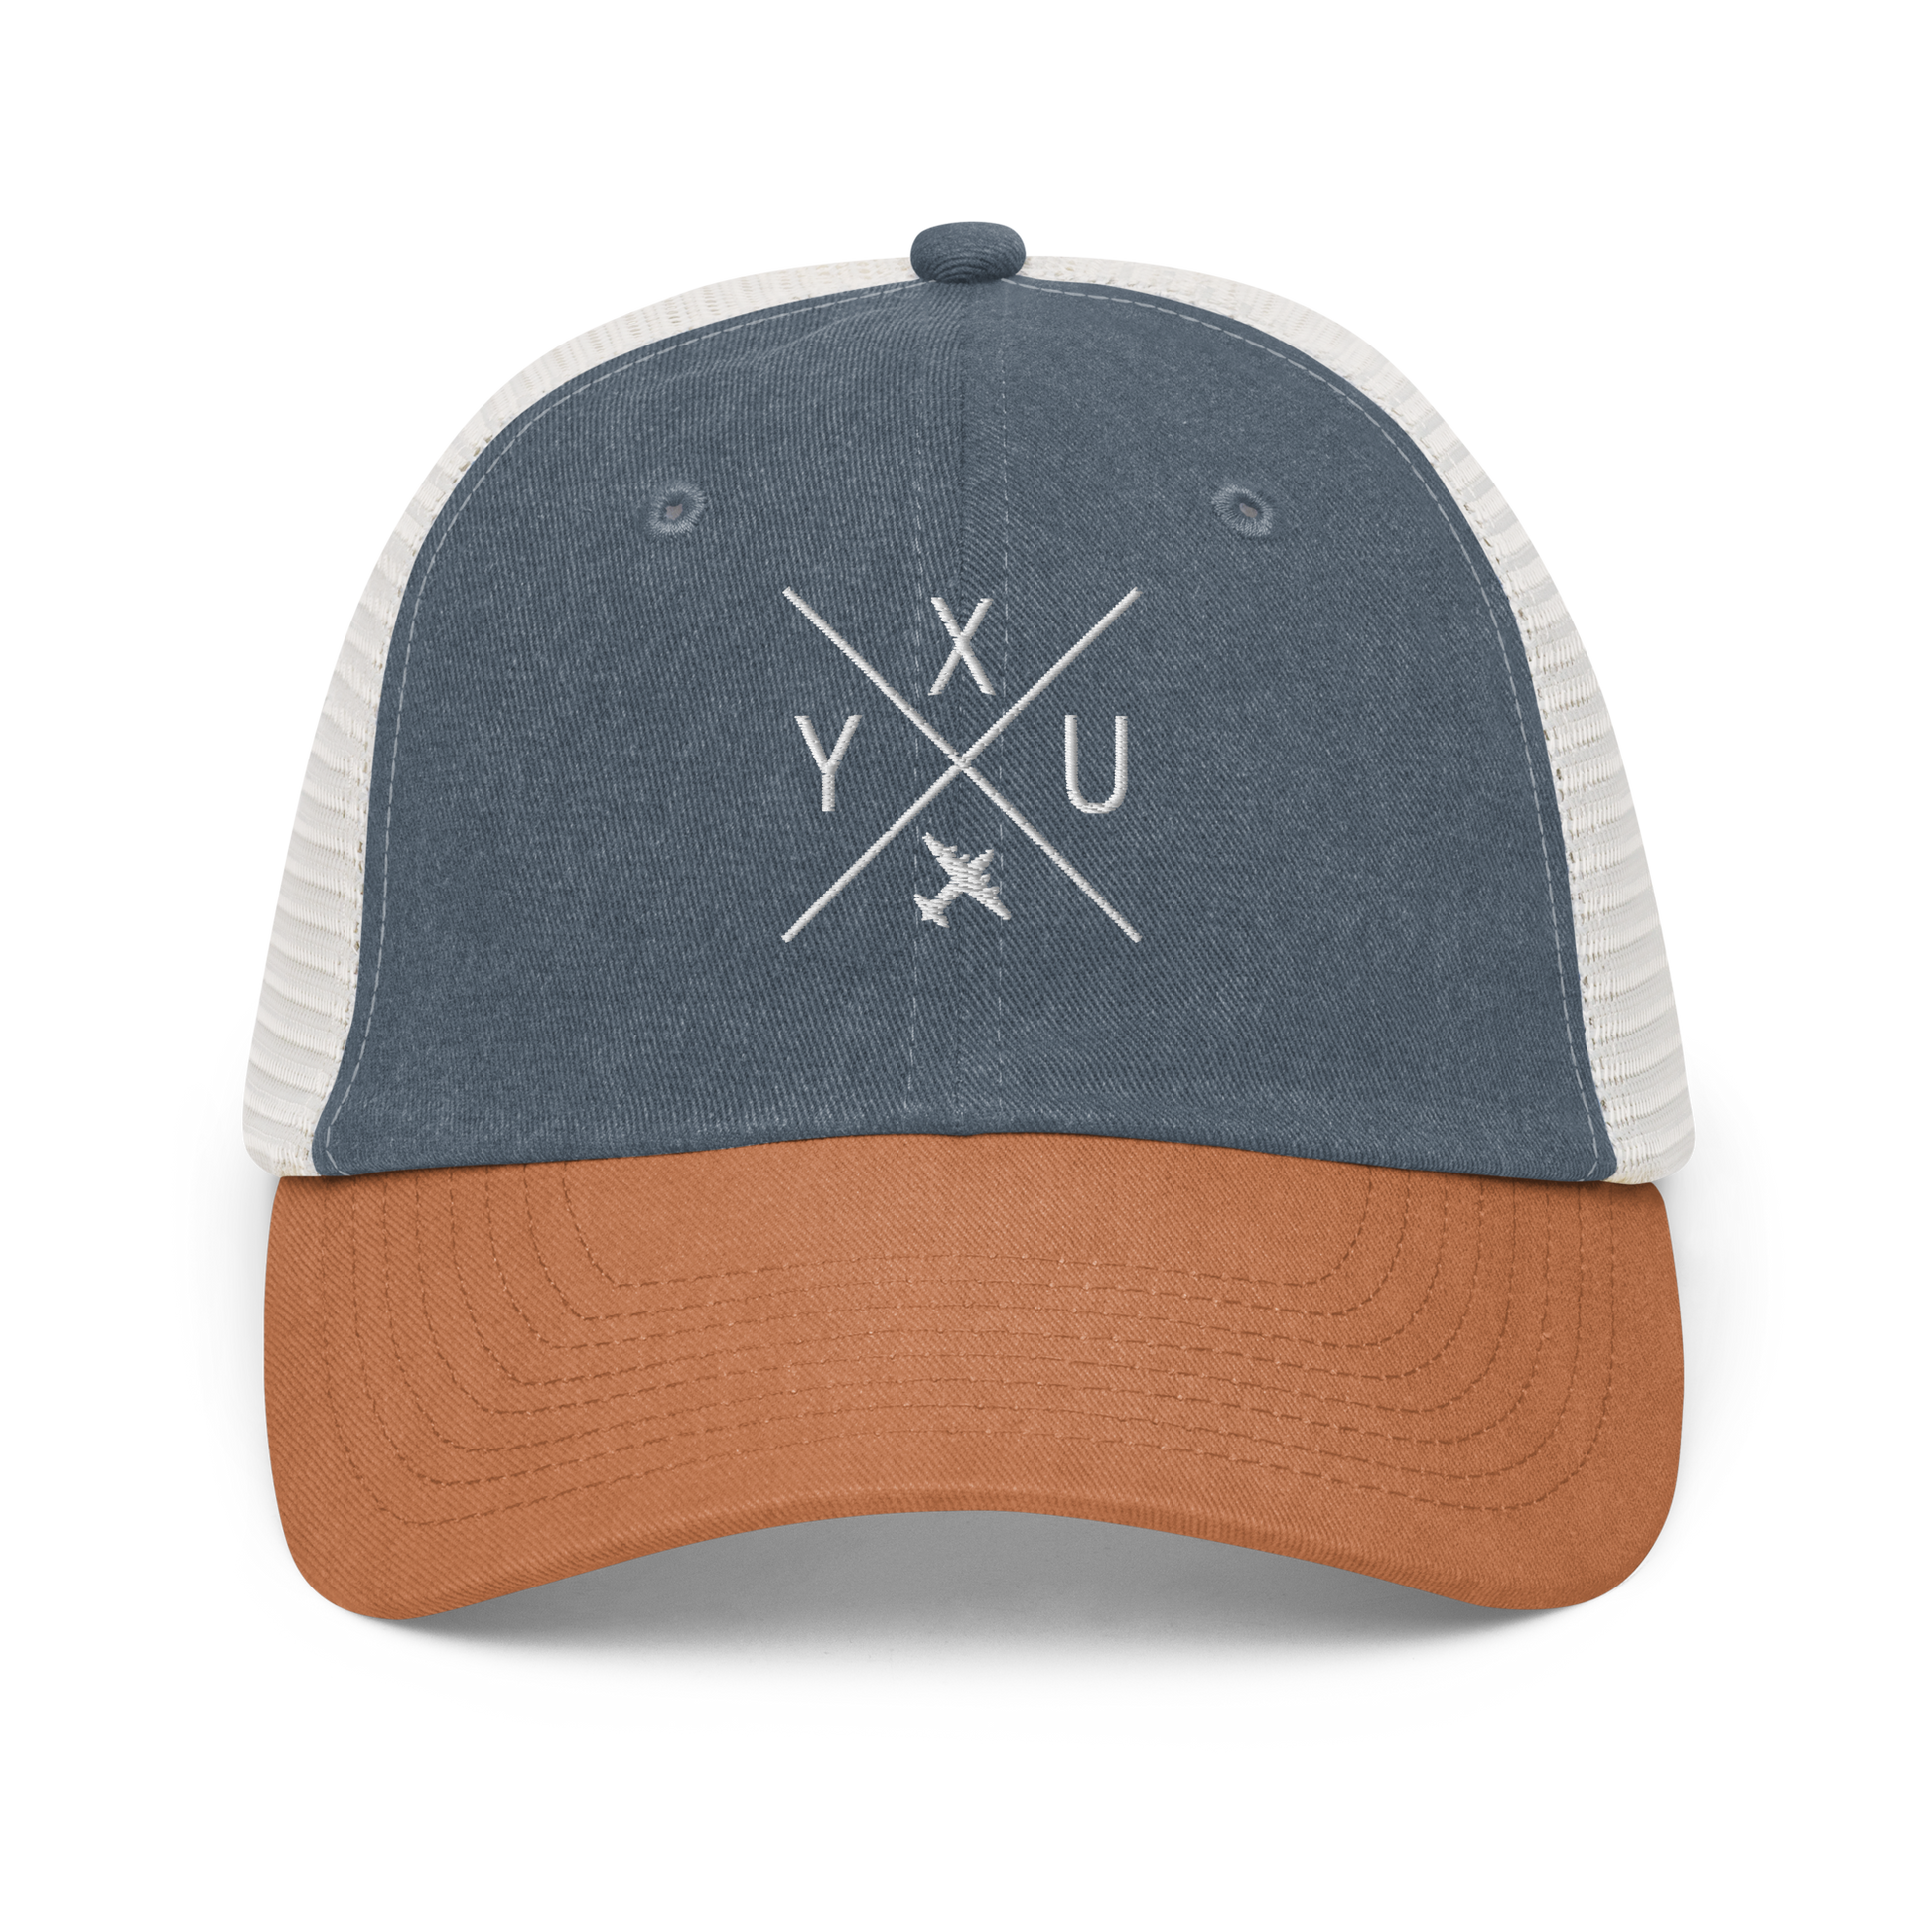 YHM Designs - YXU London Pigment-Dyed Trucker Cap - Crossed-X Design with Airport Code and Vintage Propliner - White Embroidery - Image 15